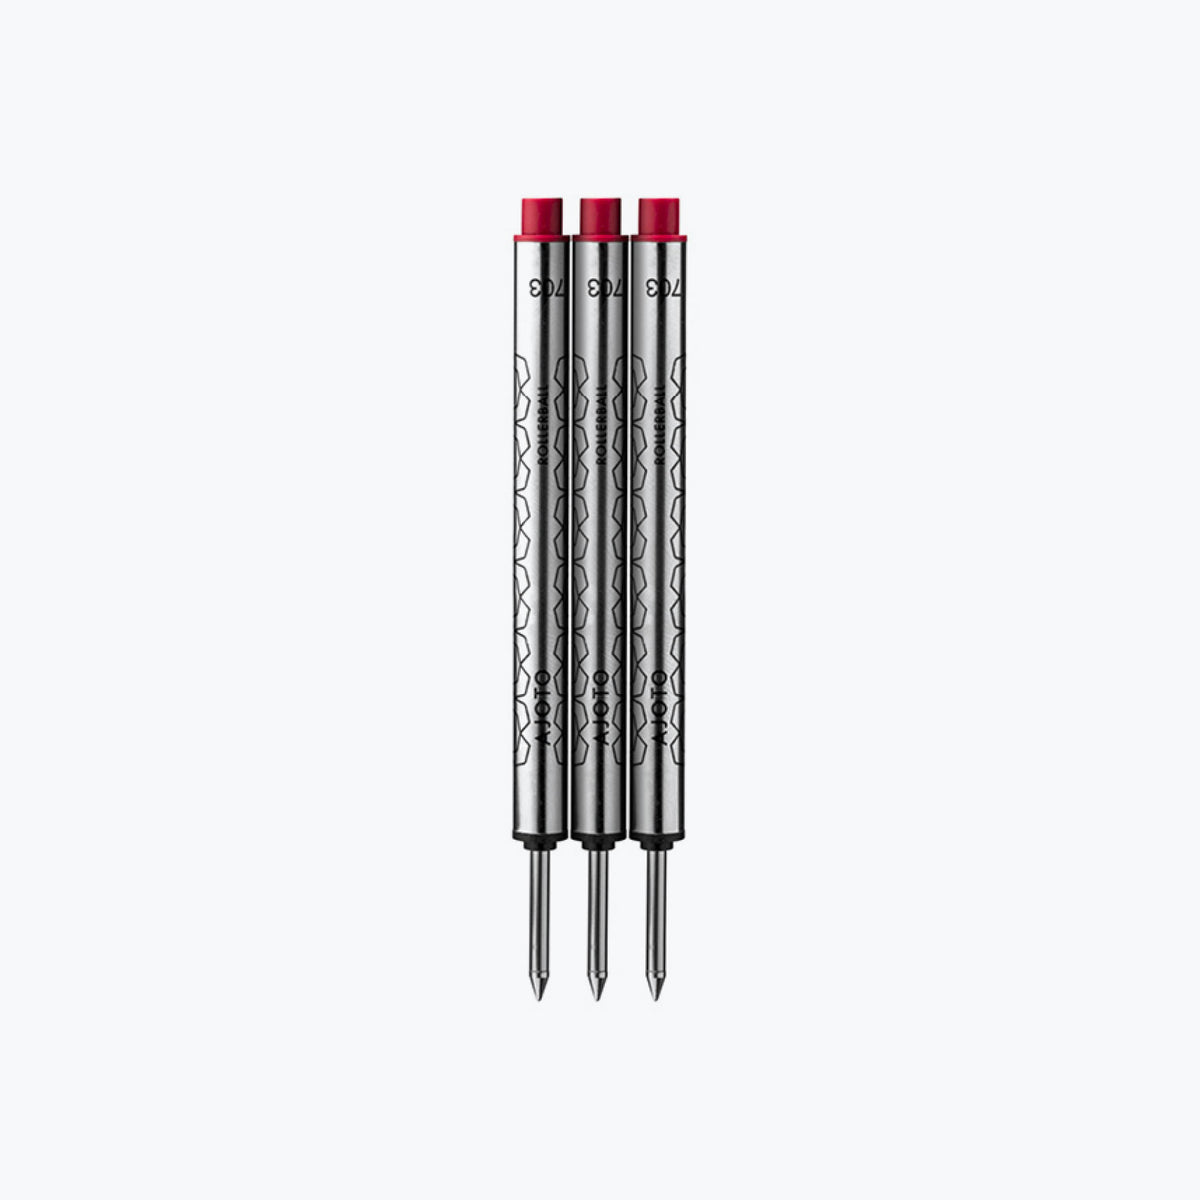 Ajoto - Rollerball Refills - Red - Pack of 3